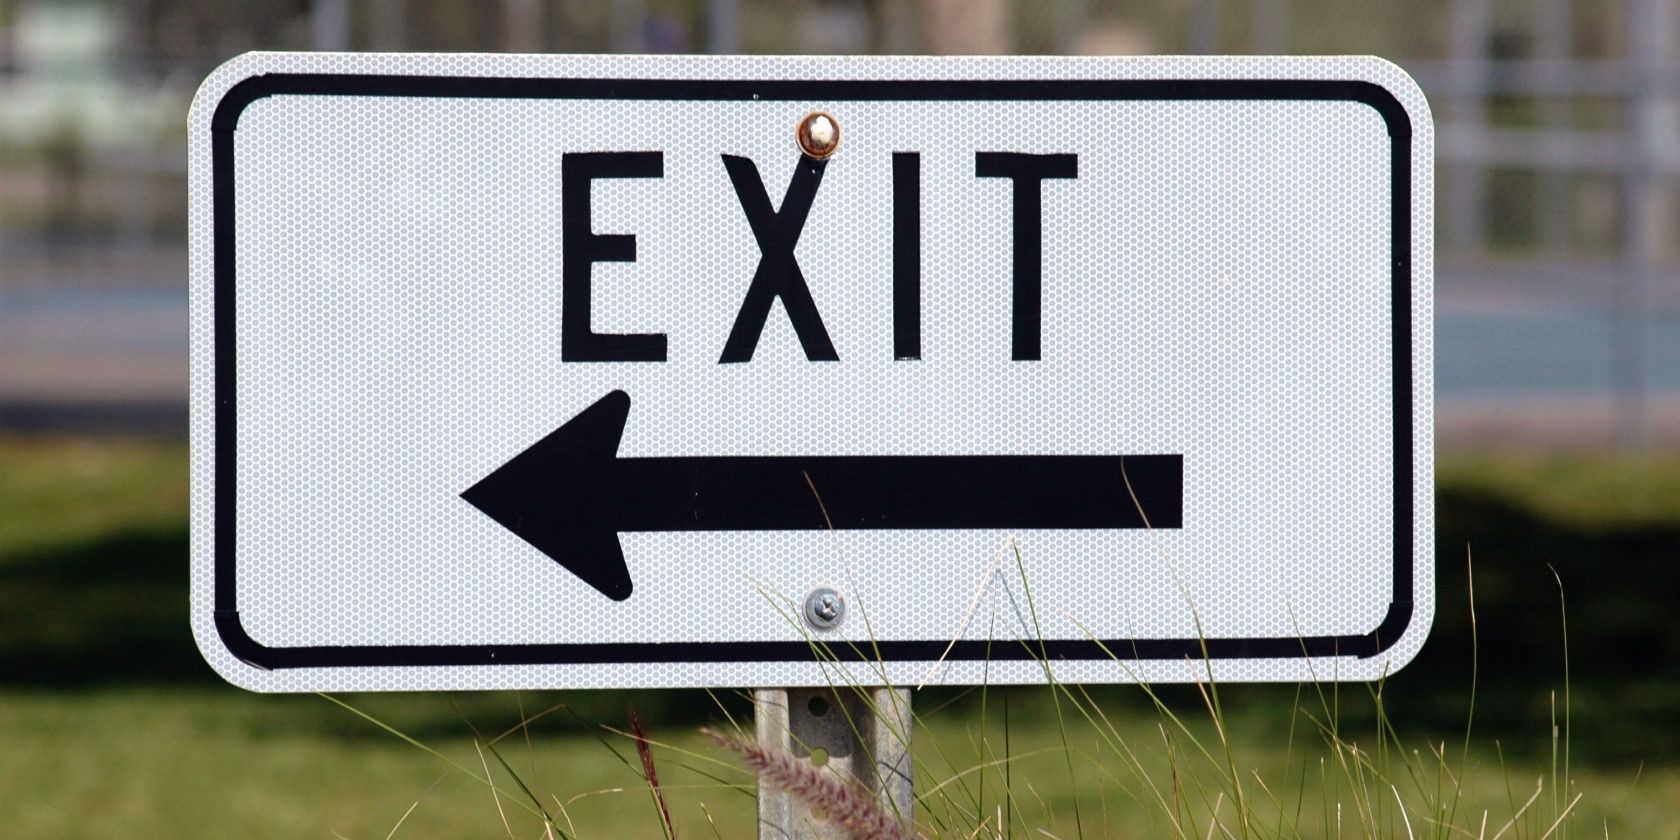 outdoor exit sign pointing left